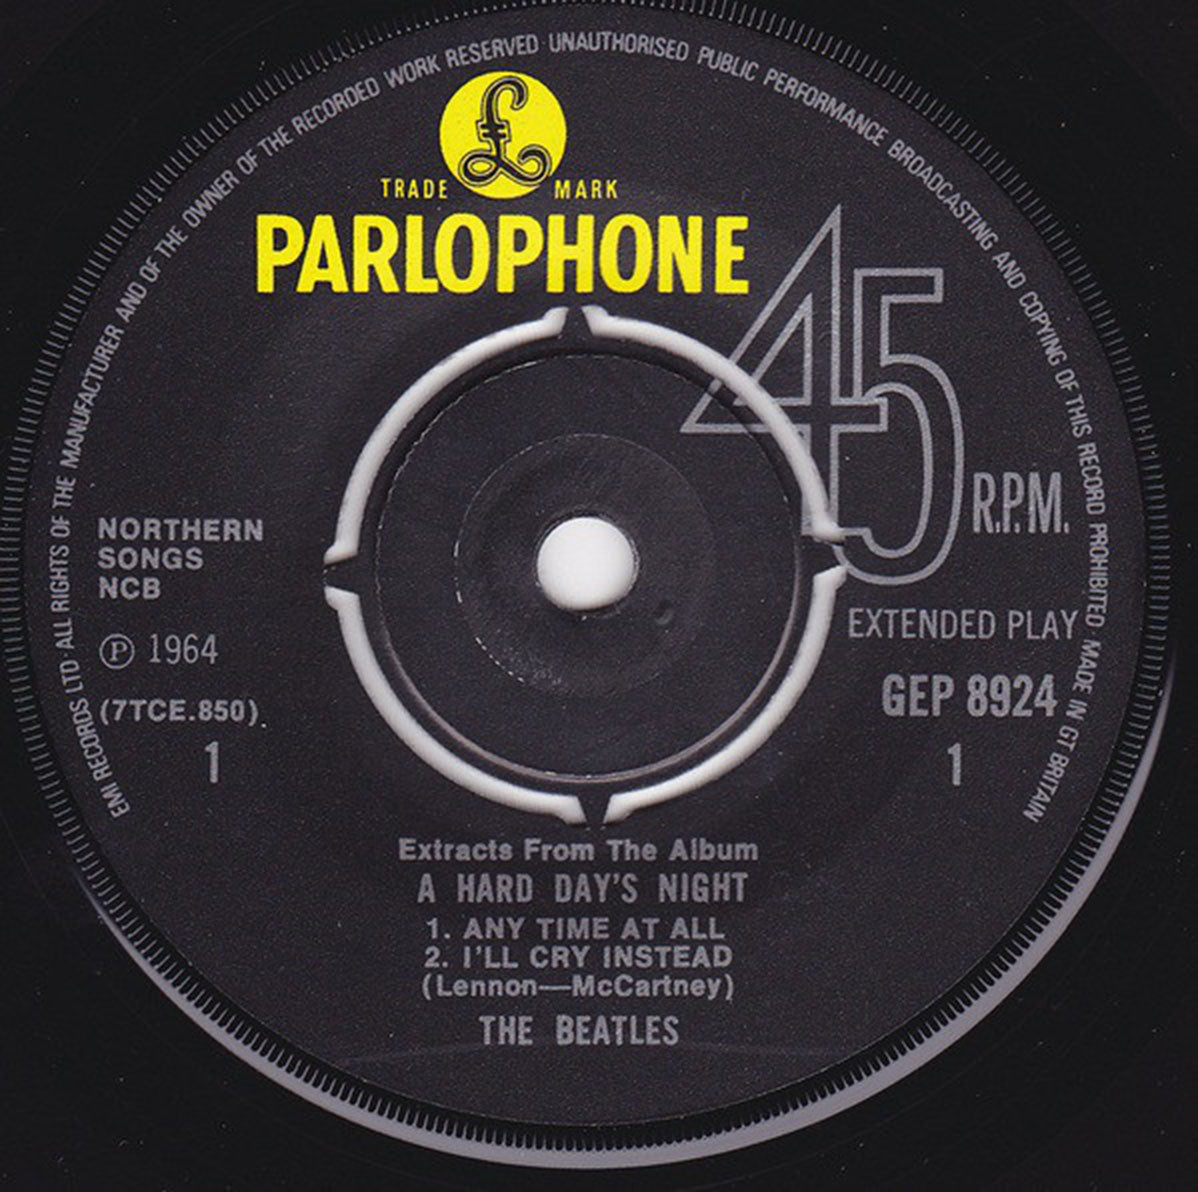 The Beatles ‎– Extracts From The Album A Hard Day's Night - 45 RPM MONO UK Pressing